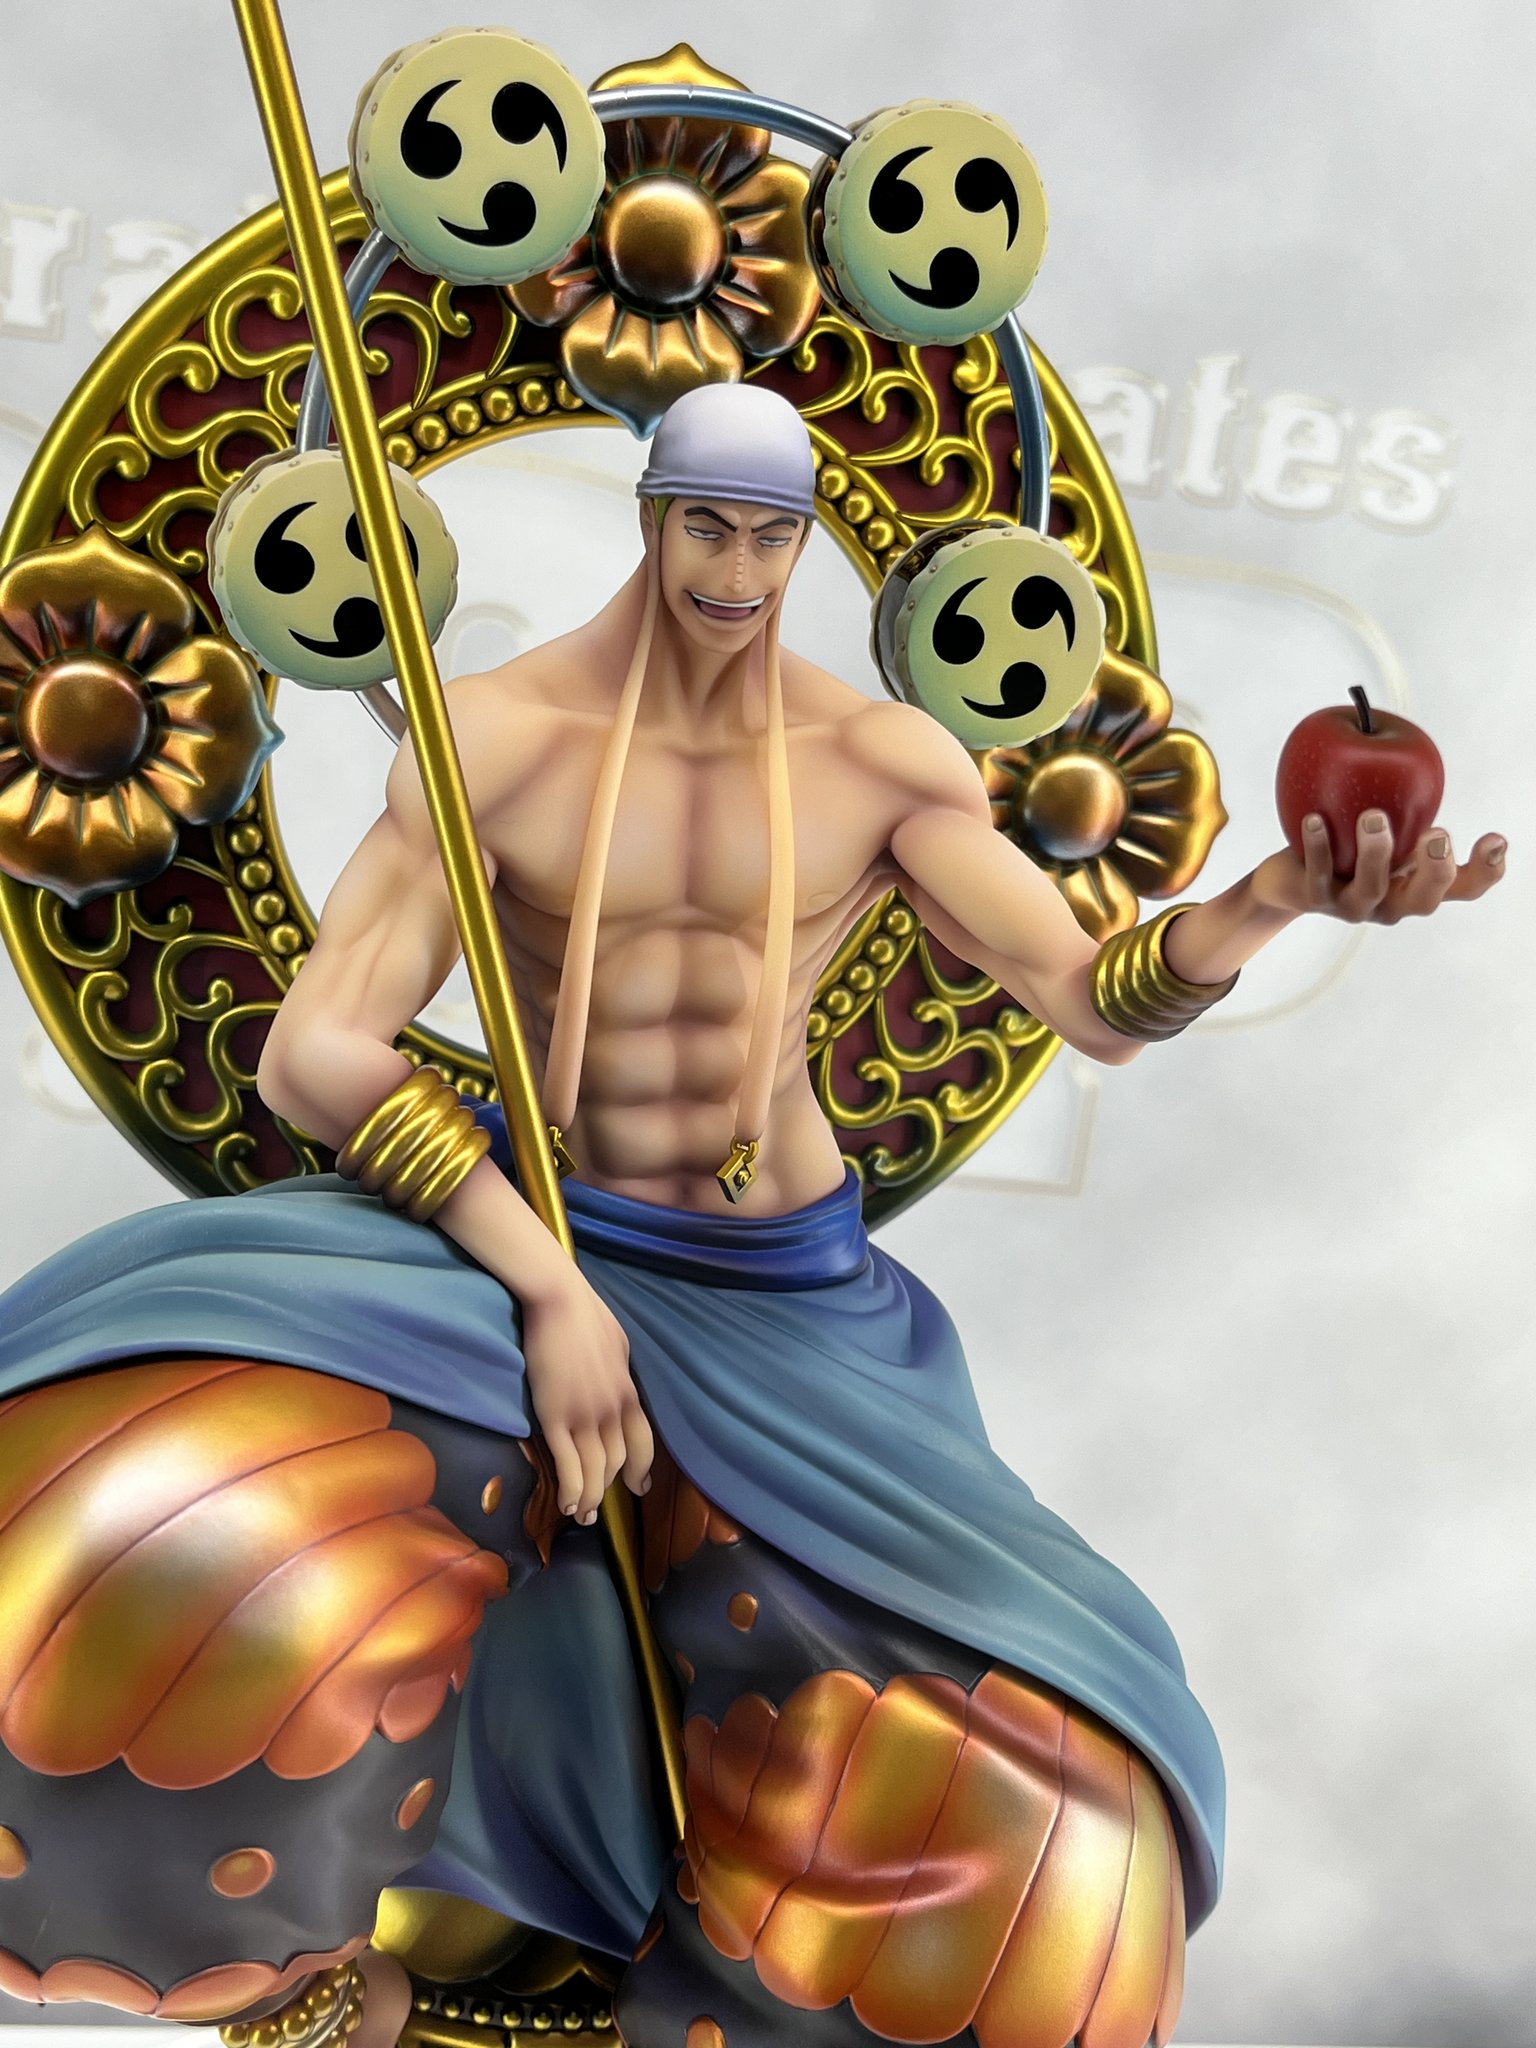 Enel is the former tyrannical “God” of Skypiea. : r/OnePiece